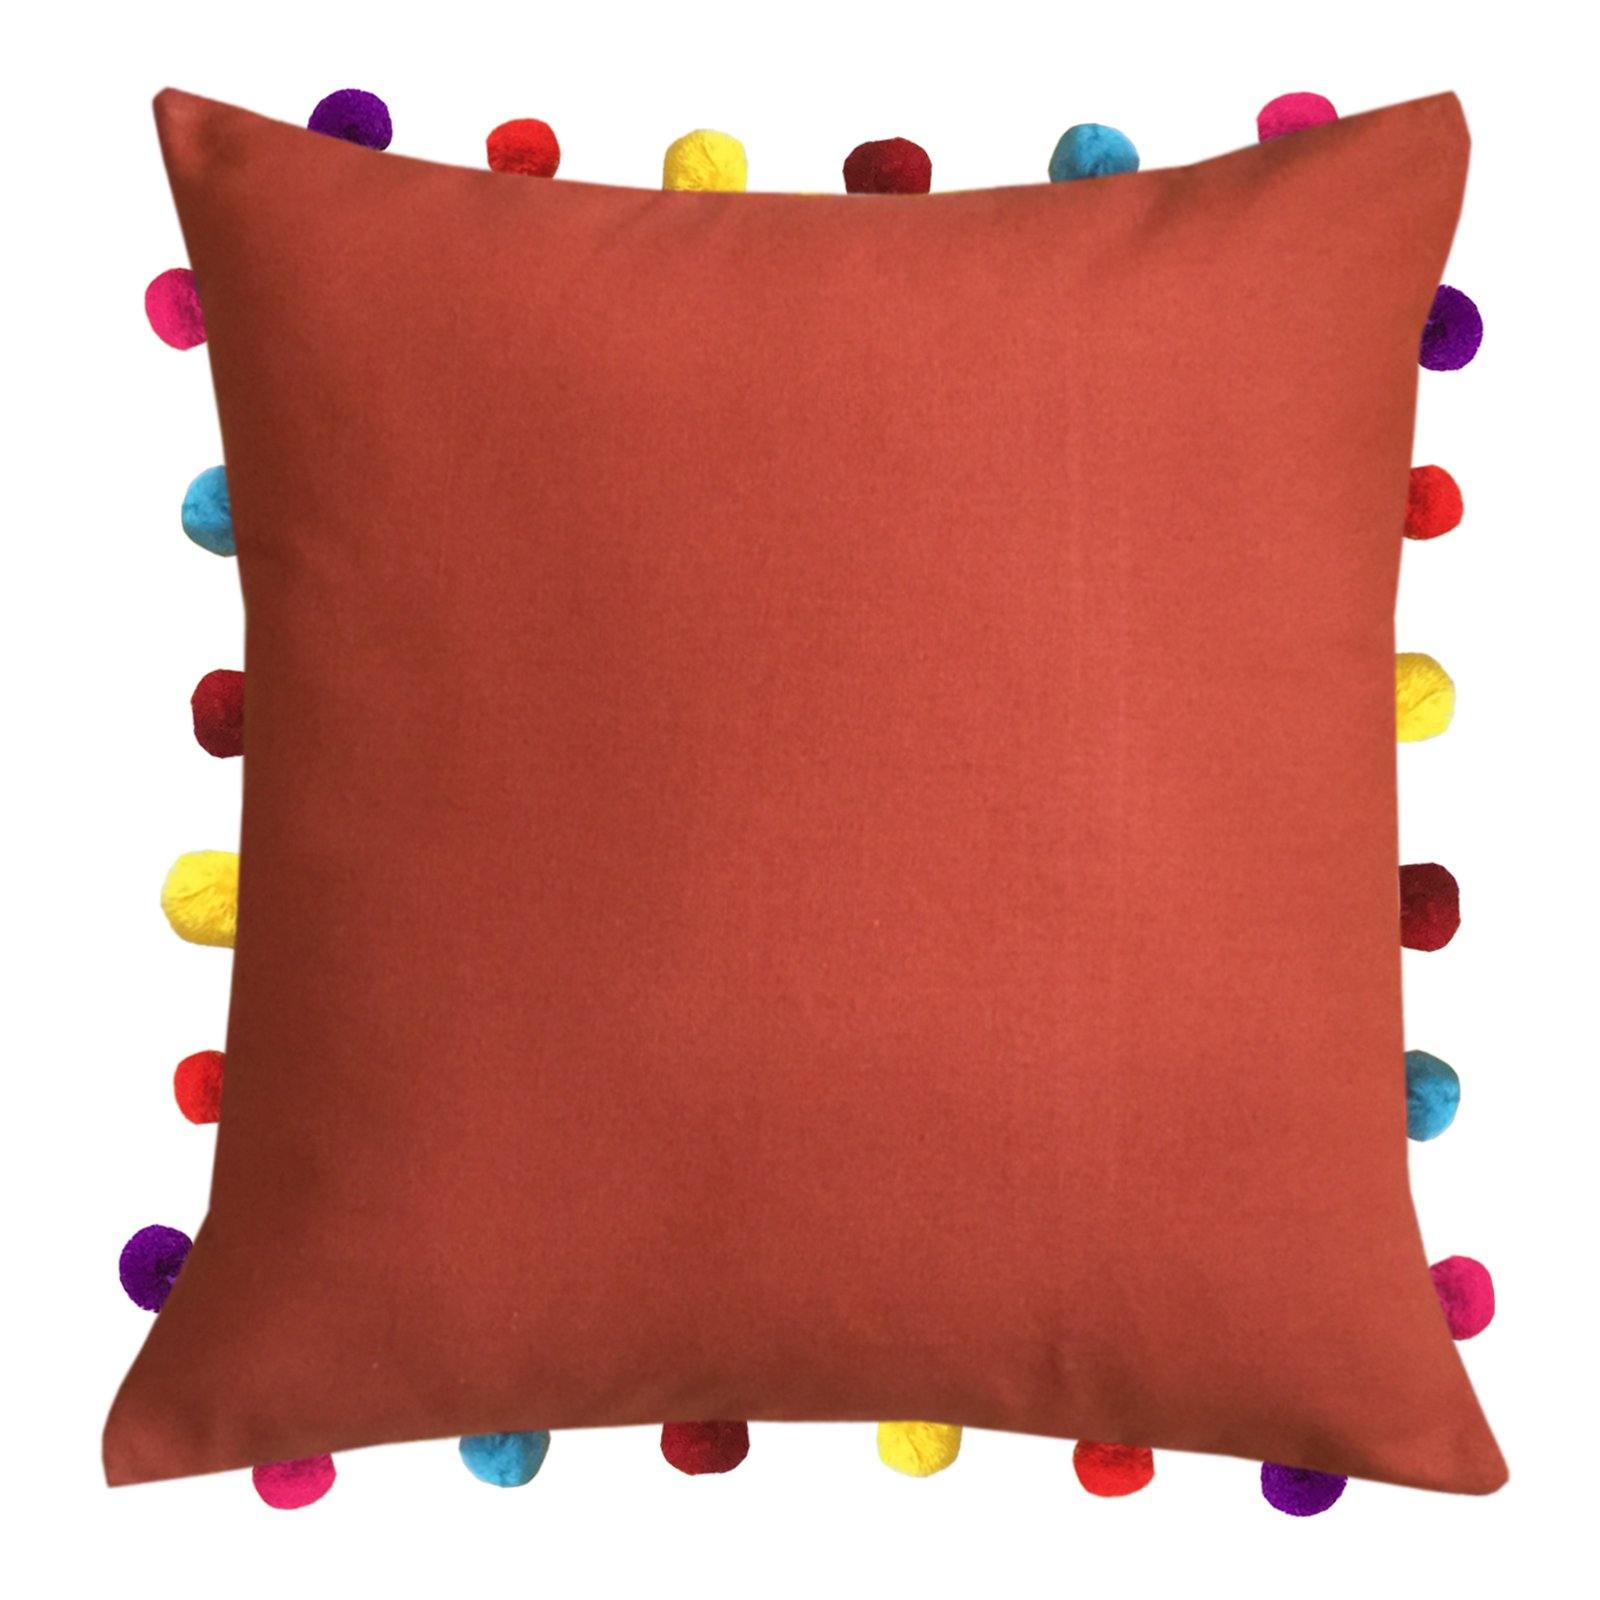 Lushomes Red Wood Cushion Cover with Colorful Pom pom (Single pc, 18 x 18”) - Lushomes